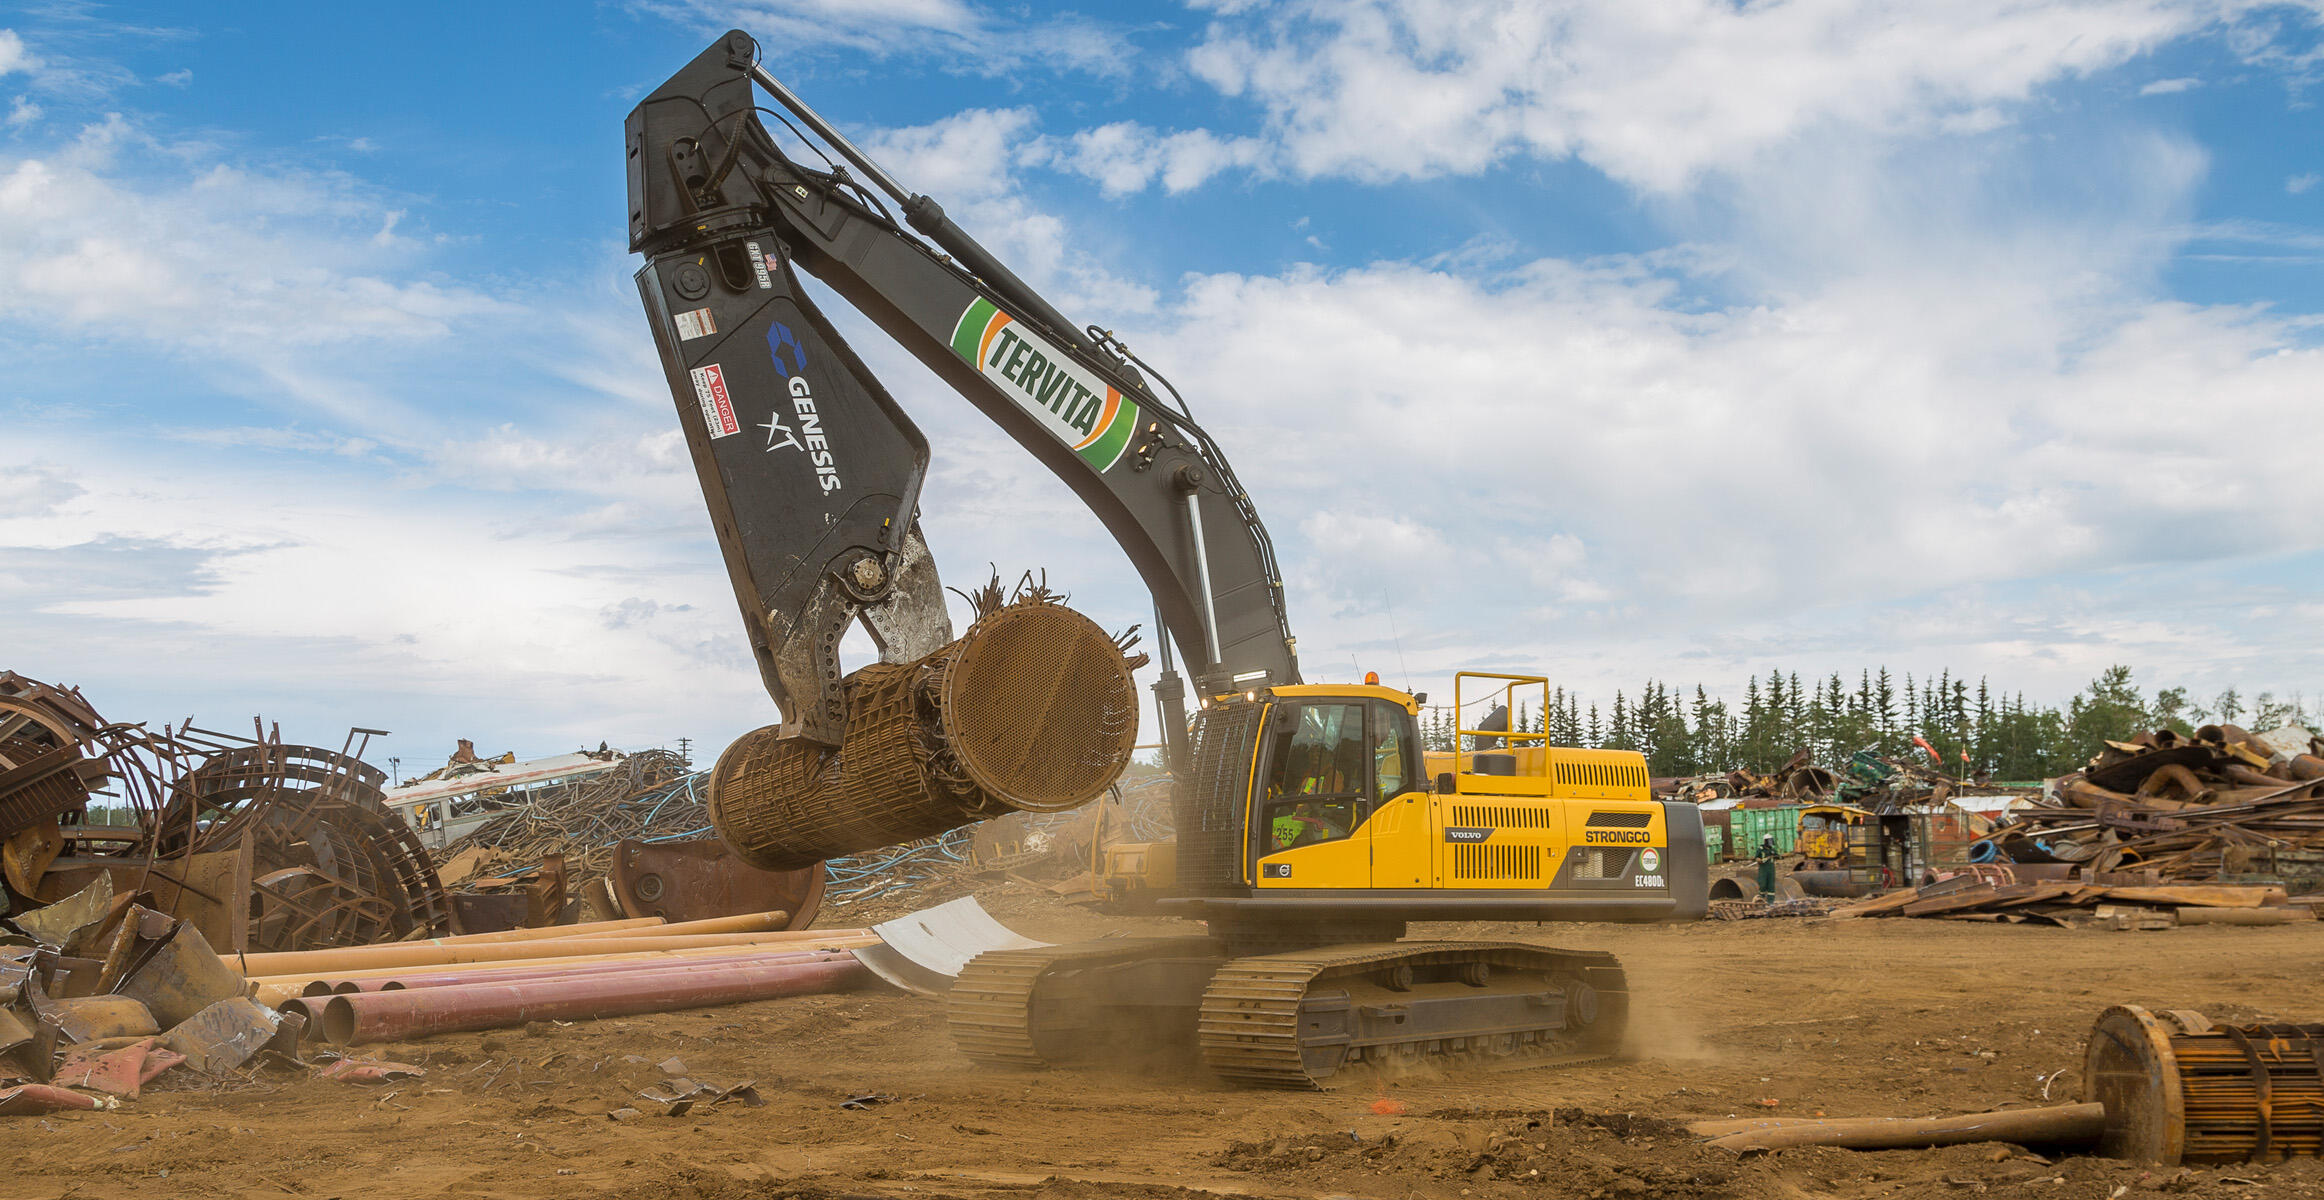 Volvo EC480D crawler excavator with shear at Tervita Metals Recycling worksite in Canada